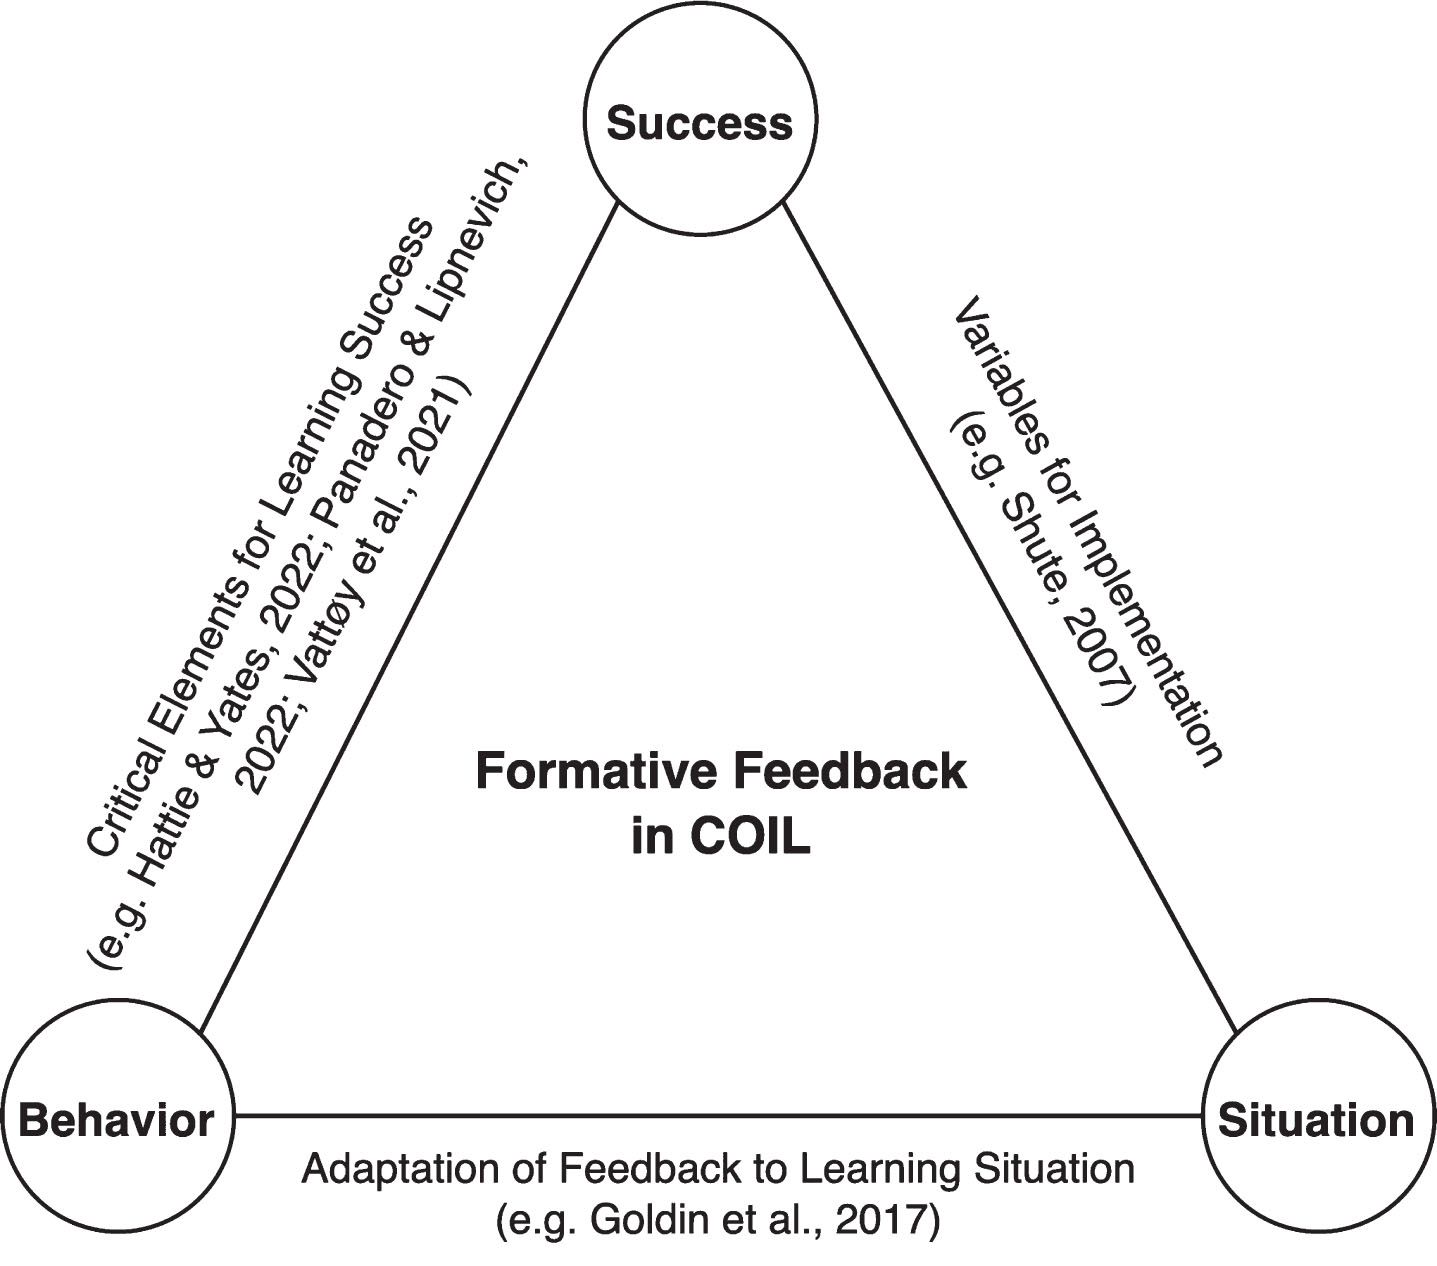 Formative Feedback in COIL (authors’ own illustration).